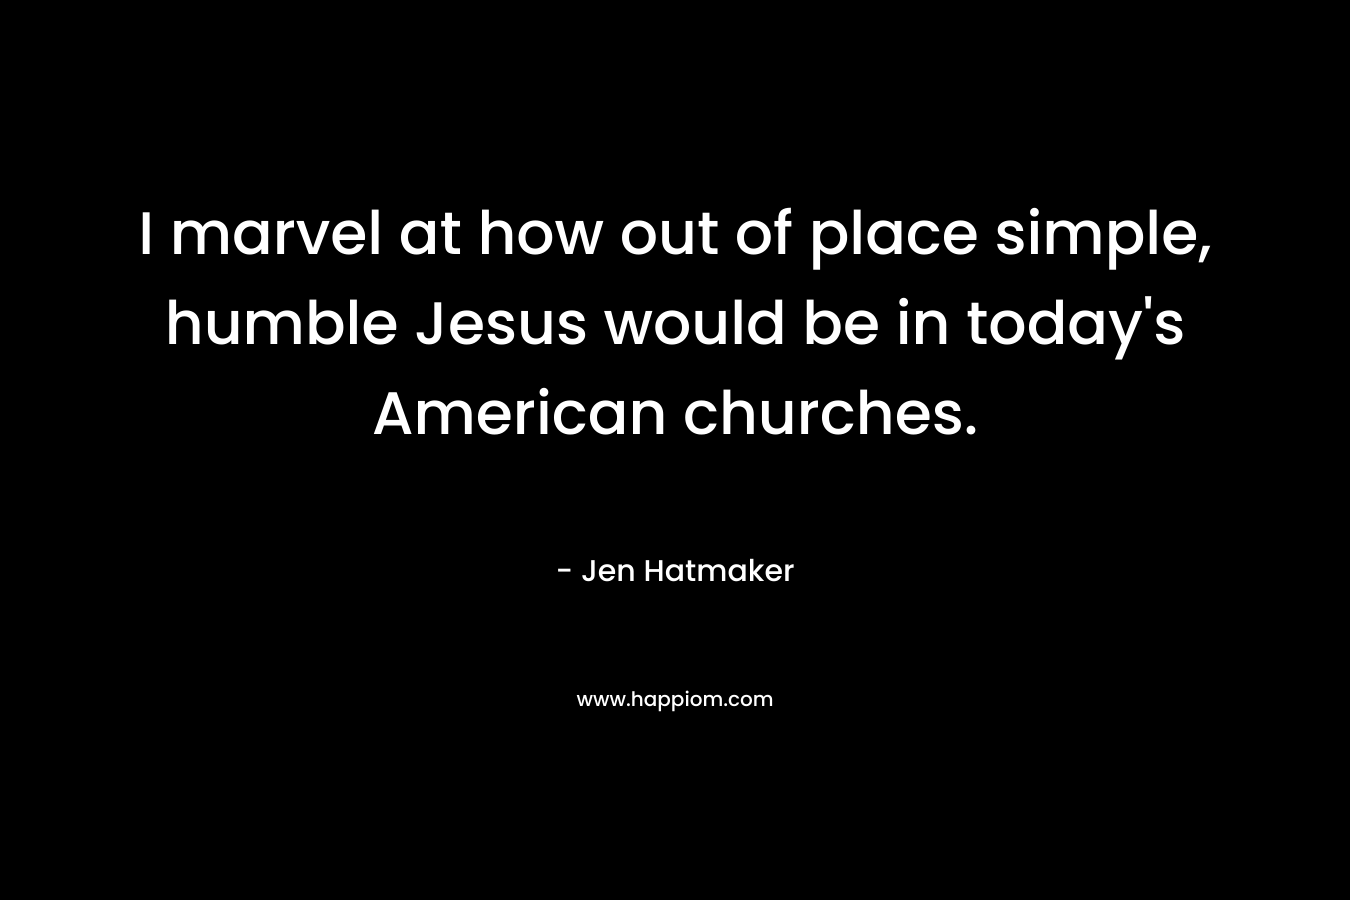 I marvel at how out of place simple, humble Jesus would be in today’s American churches. – Jen Hatmaker